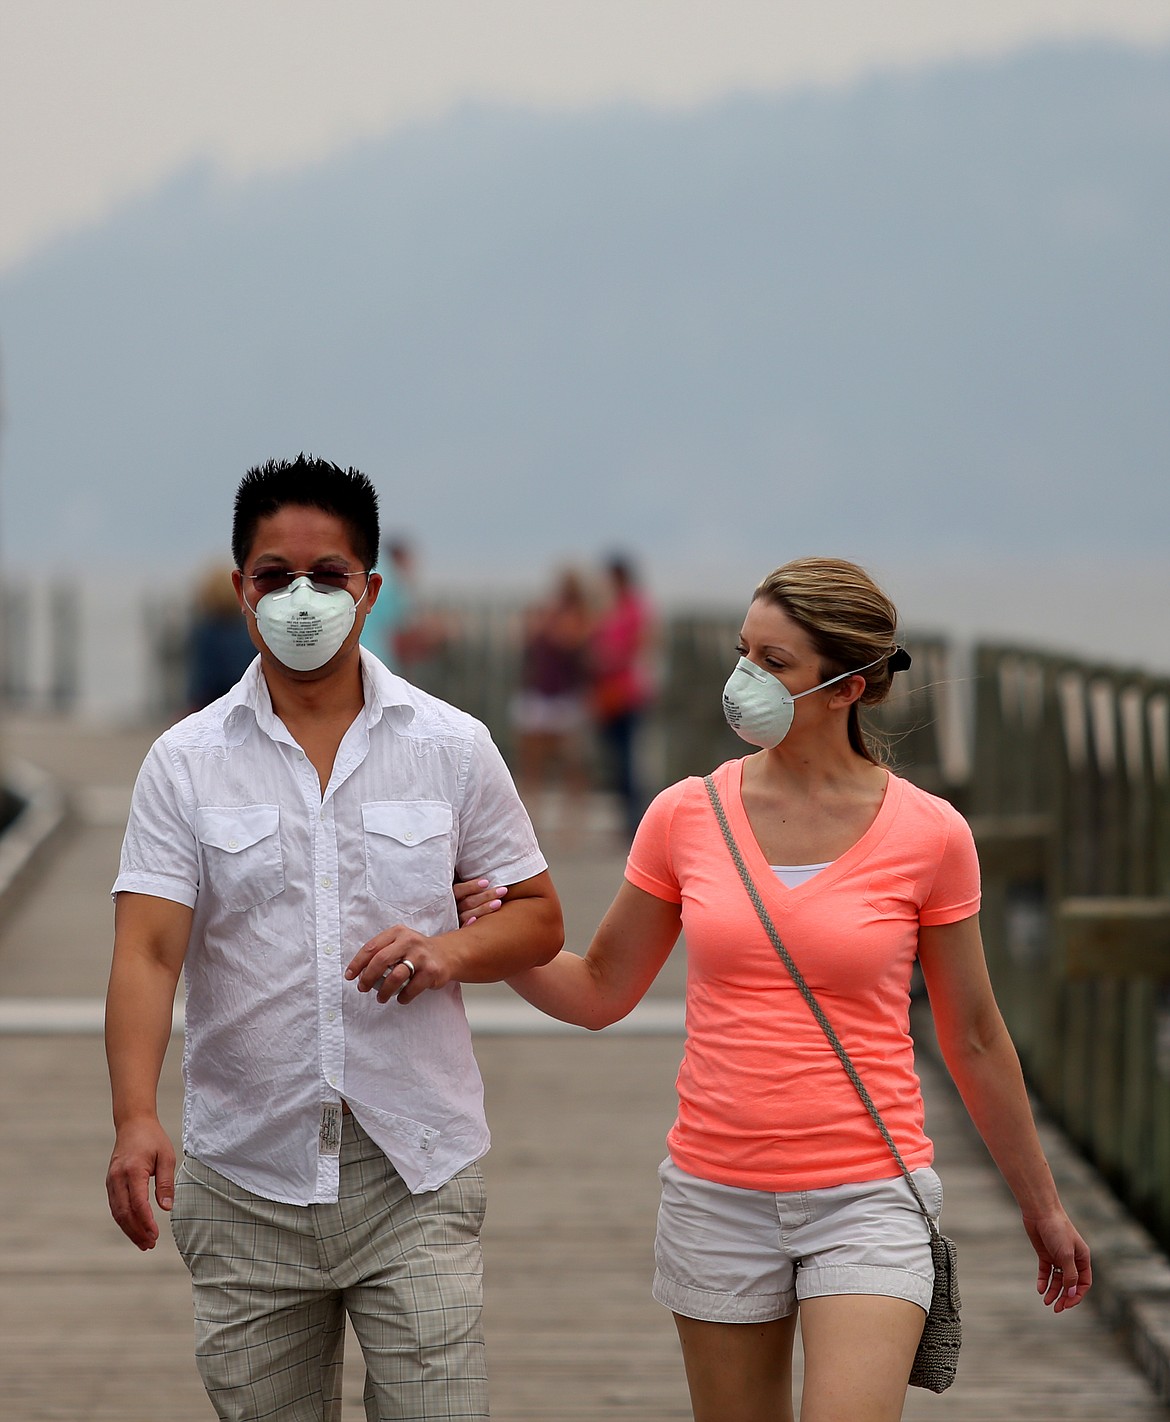 Fong and Stephenie Lee take a walk along The Coeur d'Alene Resort floating boardwalk in August this last year. Smoke from wildfires in Idaho, Canada, and Washington filled the air for much of the summer, especially August when air quality levels reached the &quot;hazardous&quot; mark. (LOREN BENOIT/Press File)